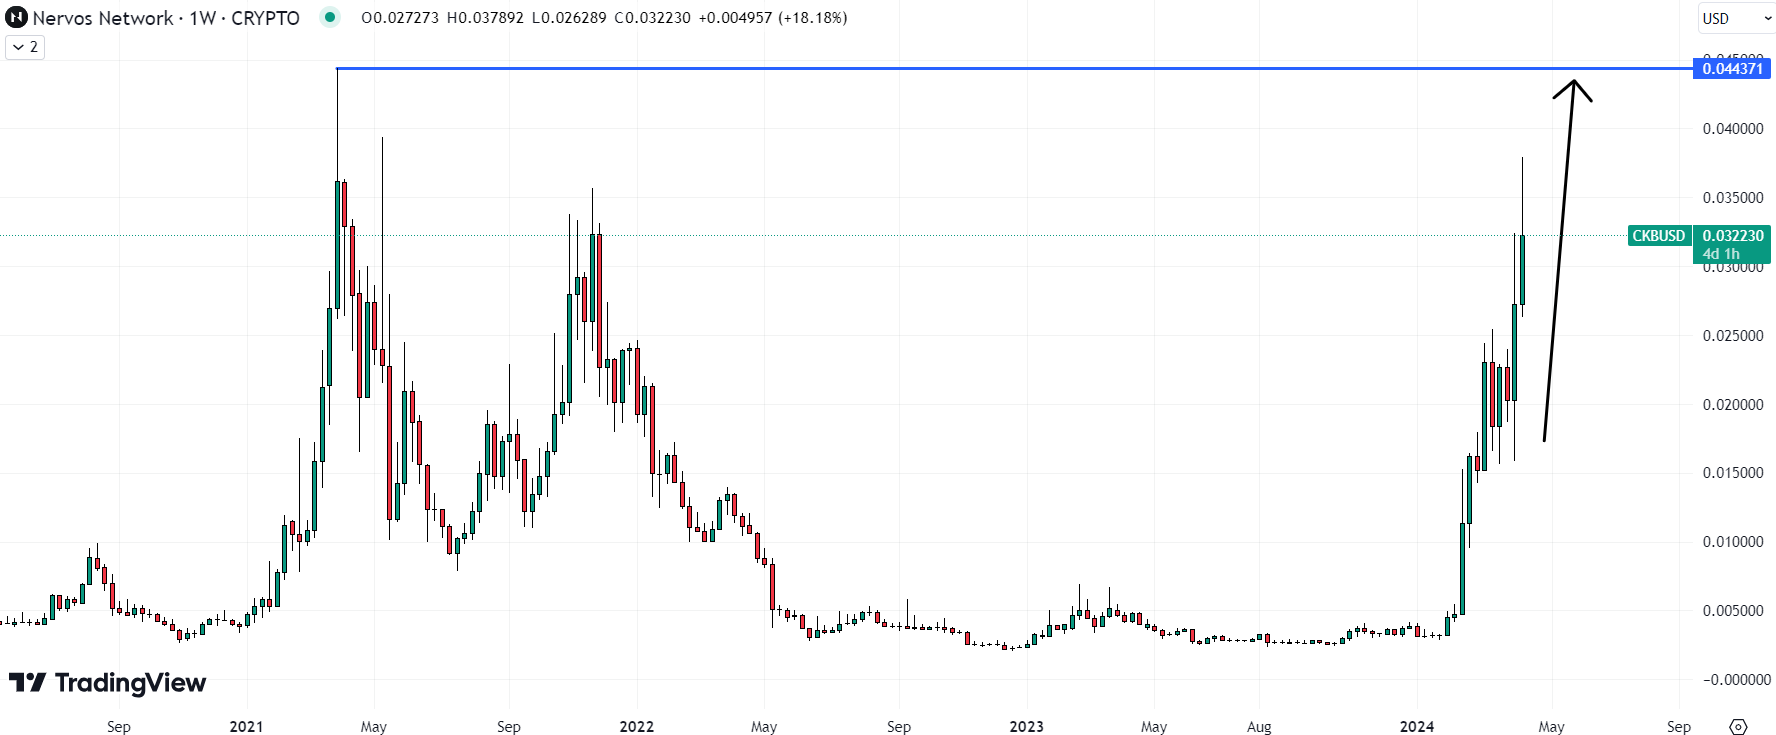 CKB could be the best cryptocurrency to buy right now as pumps quickly return to record levels. 